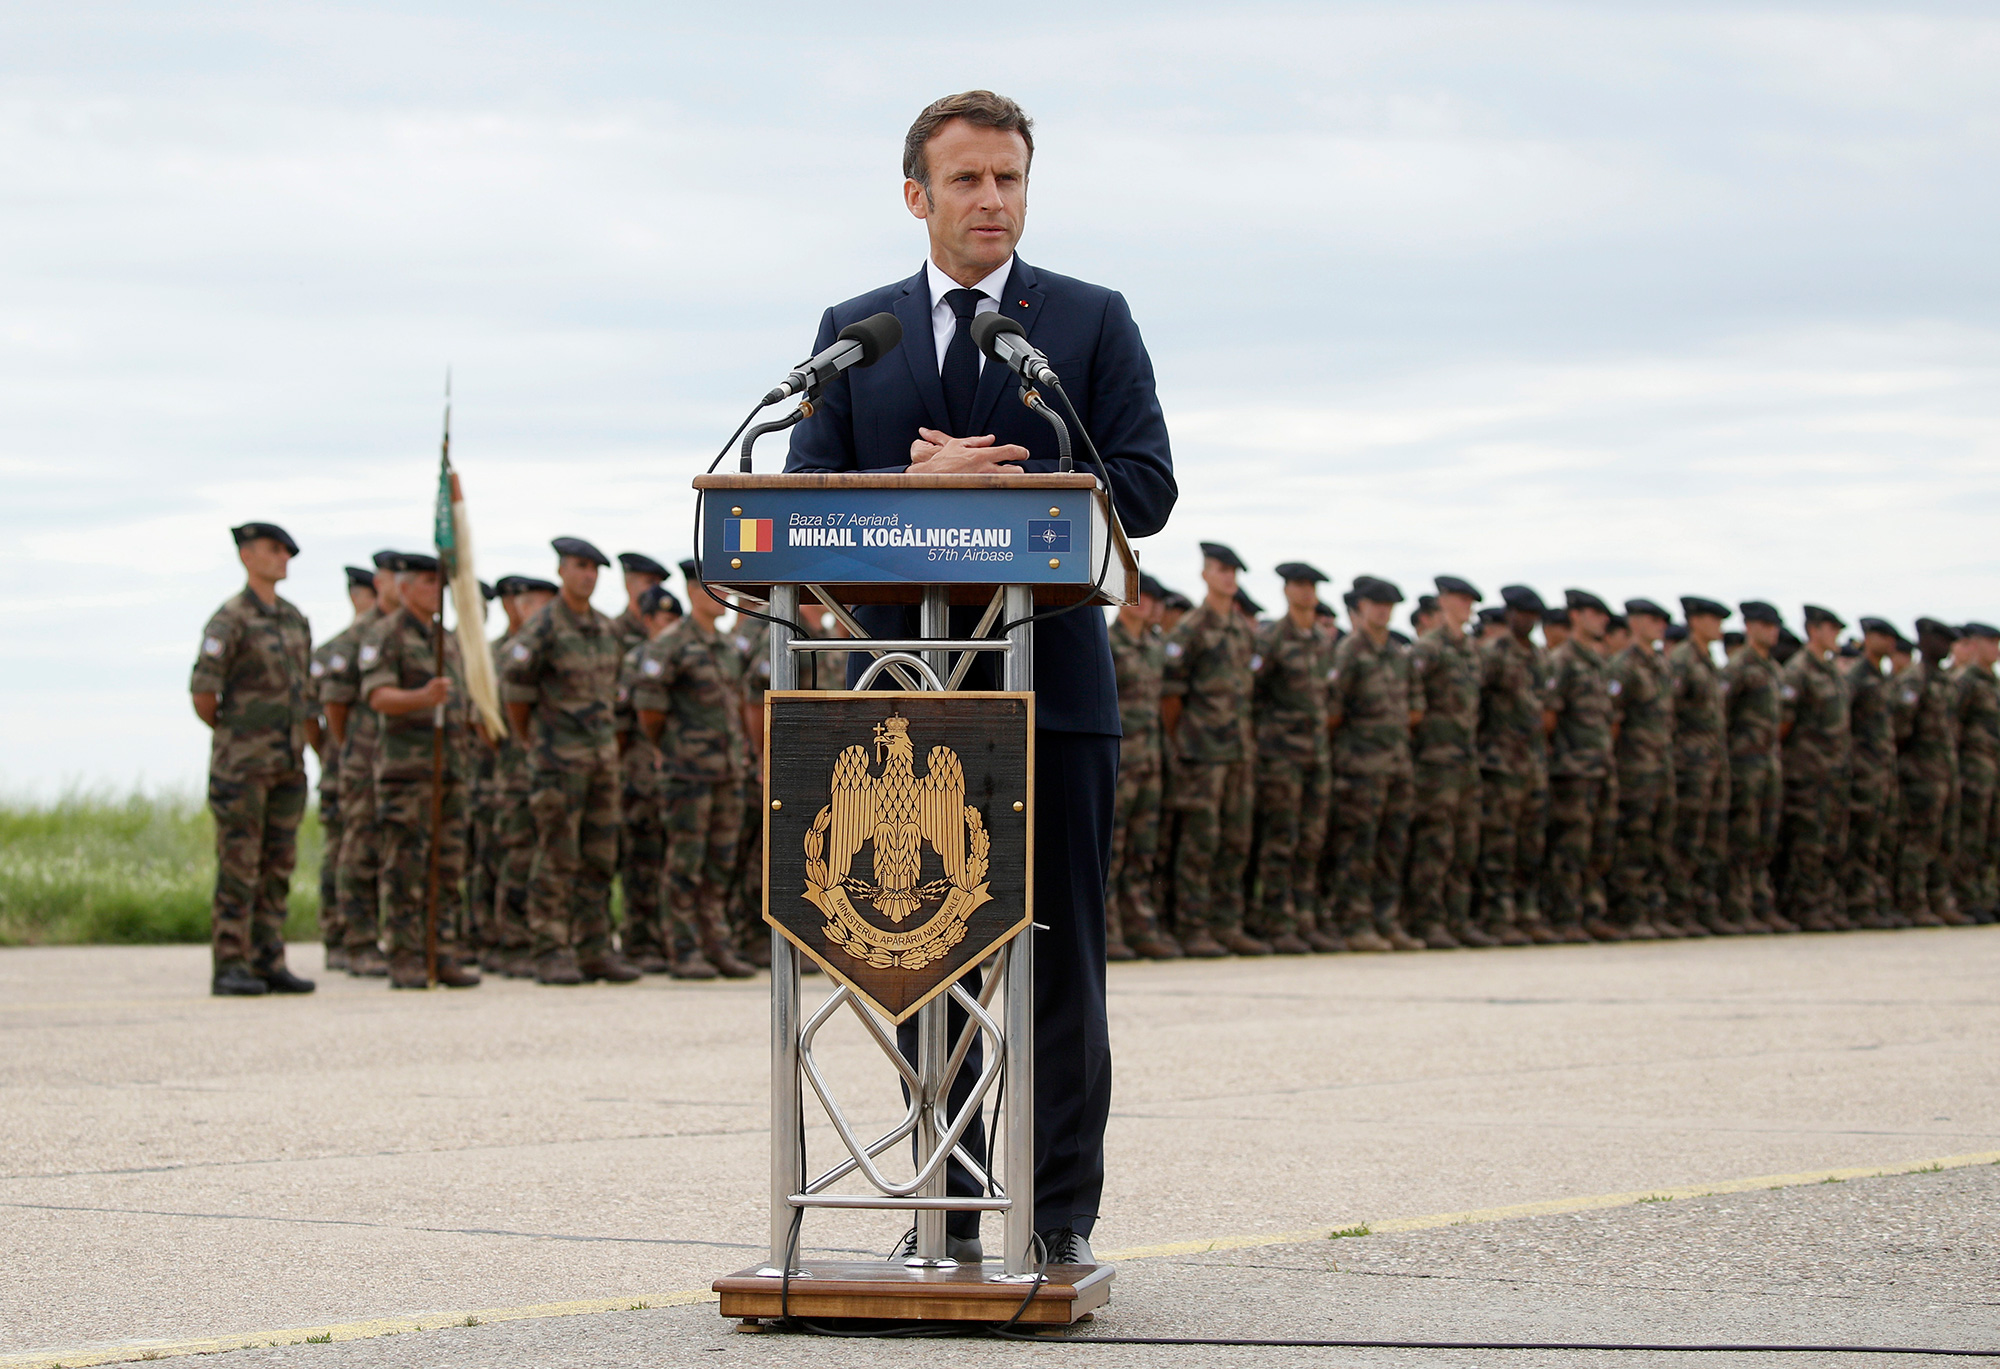 French President Emmanuel Macron delivers a speech at the Mihail Kogalniceanu Air Base near Constanta, Romania, on Wednesday, June 15.